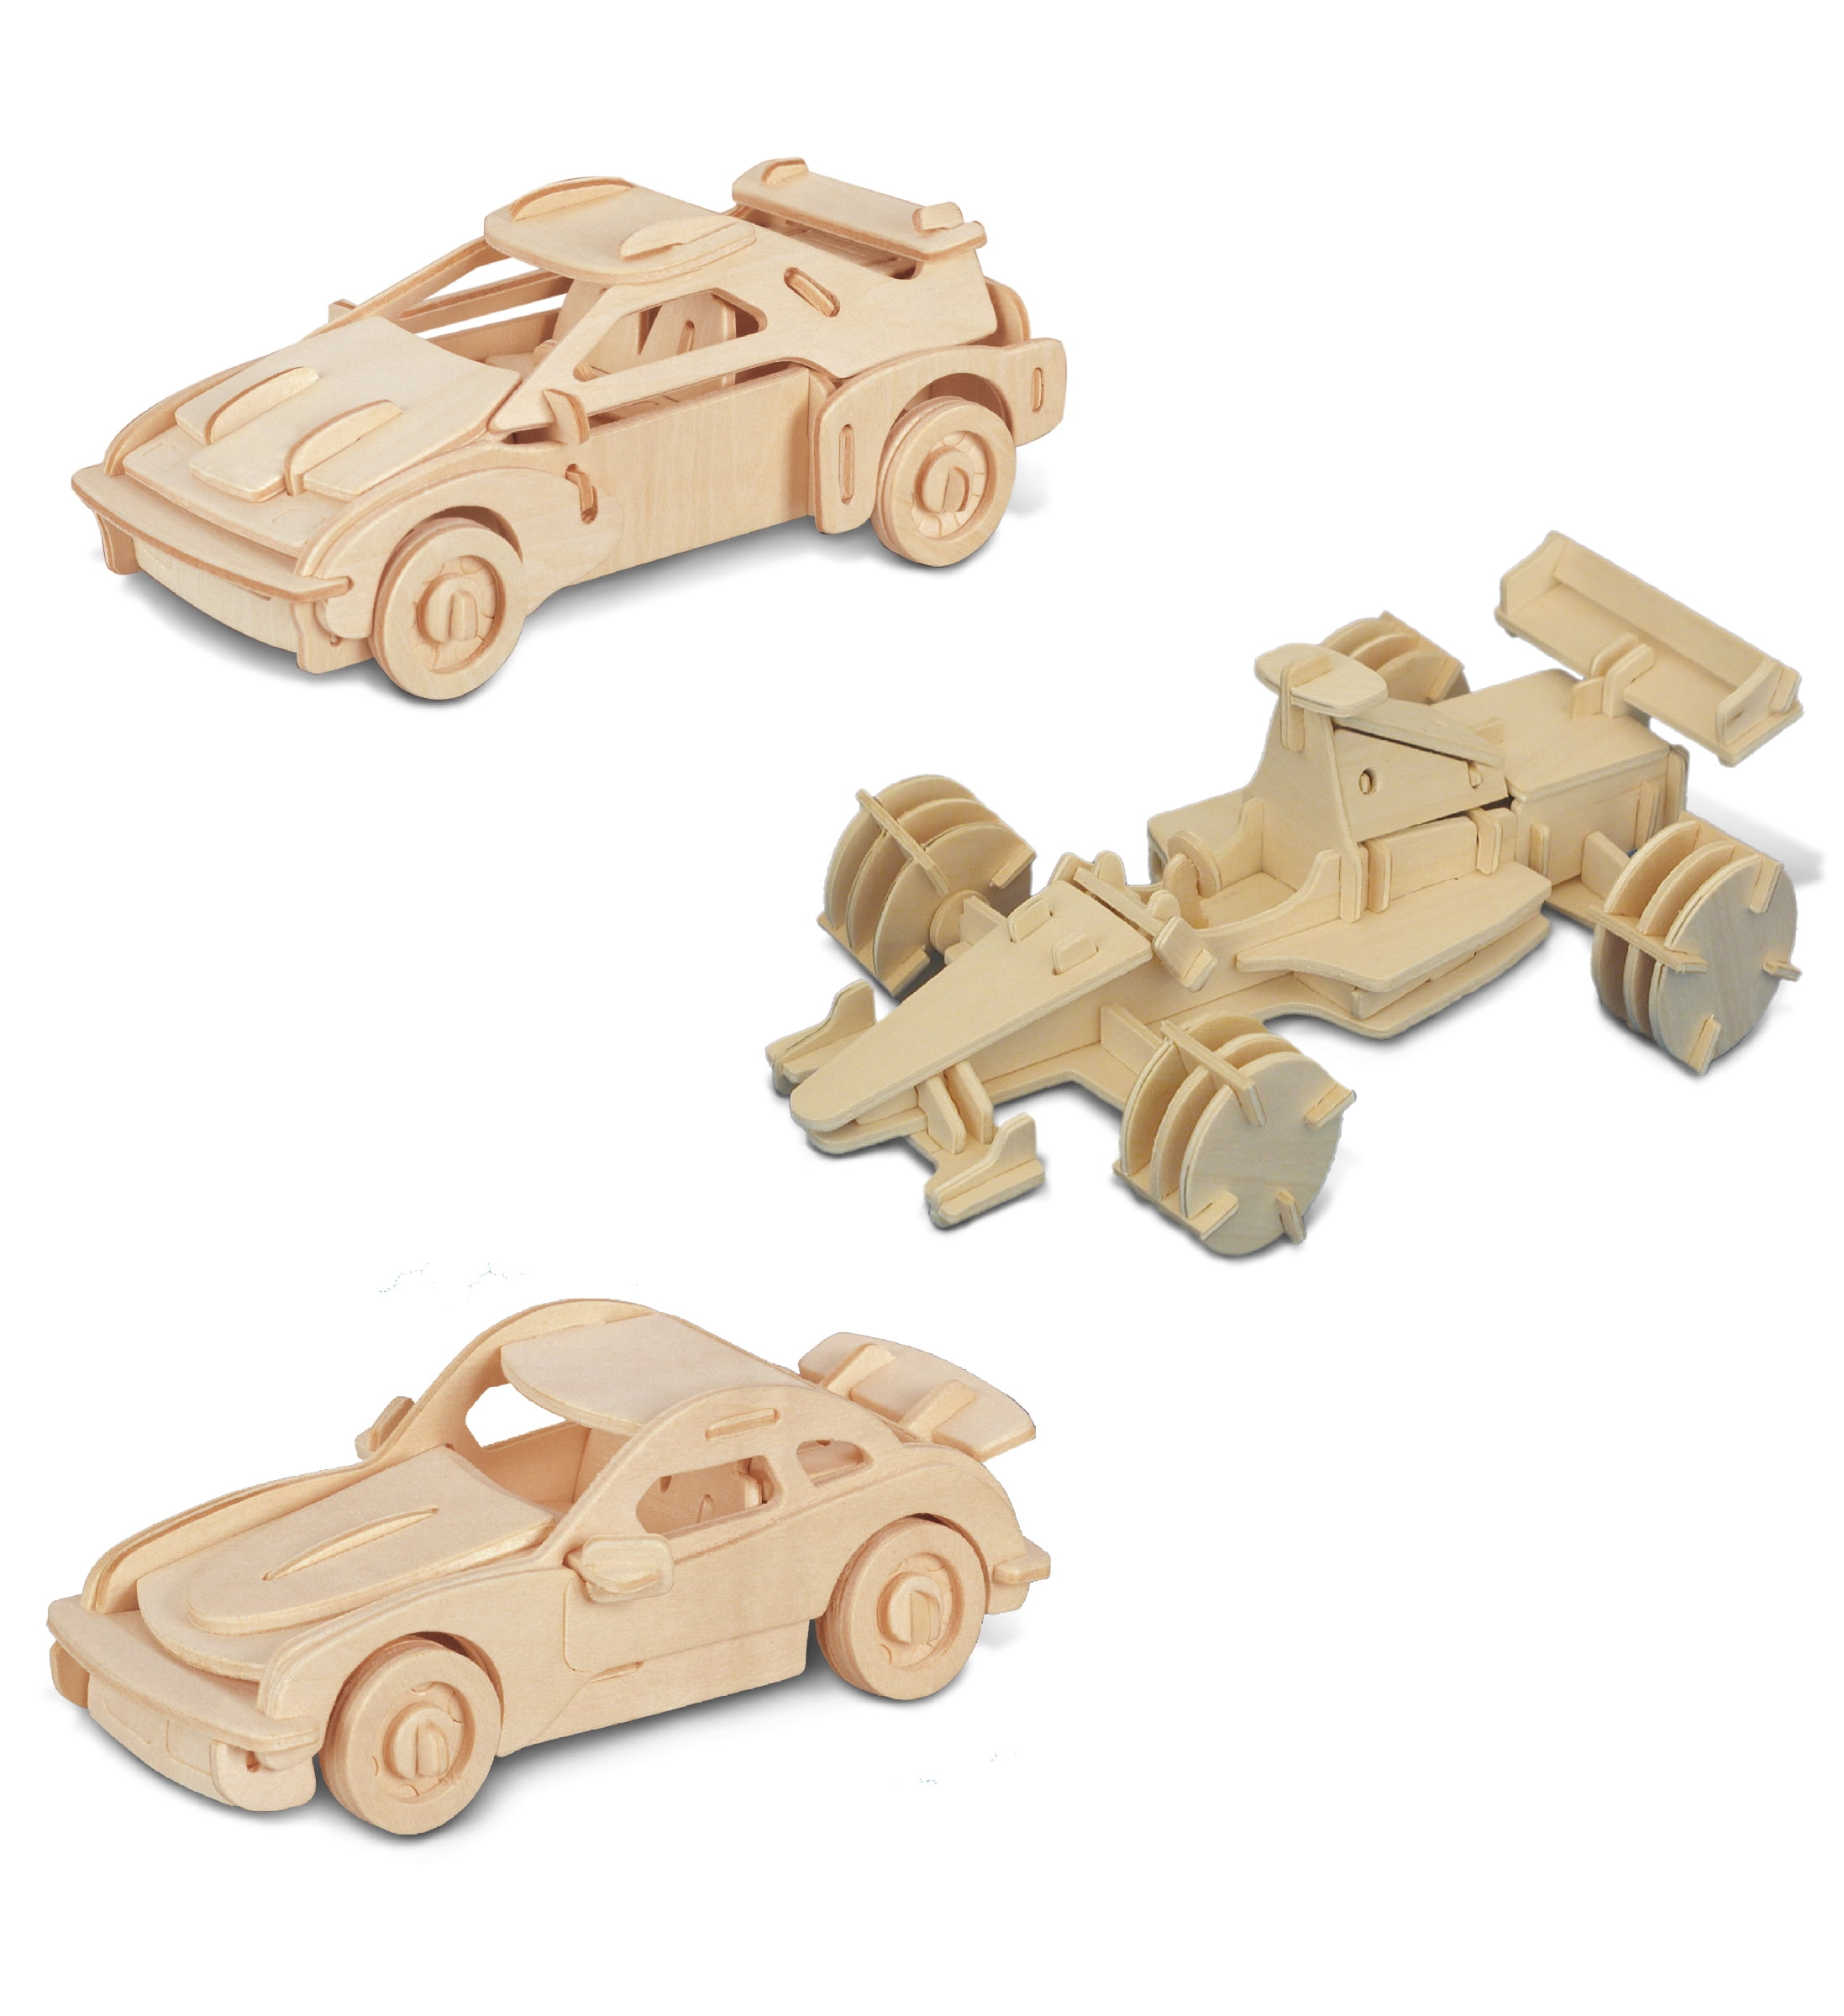 Woodcraft Construction Kit Truck 3D Wooden Puzzle DIY Remote Control Truck 